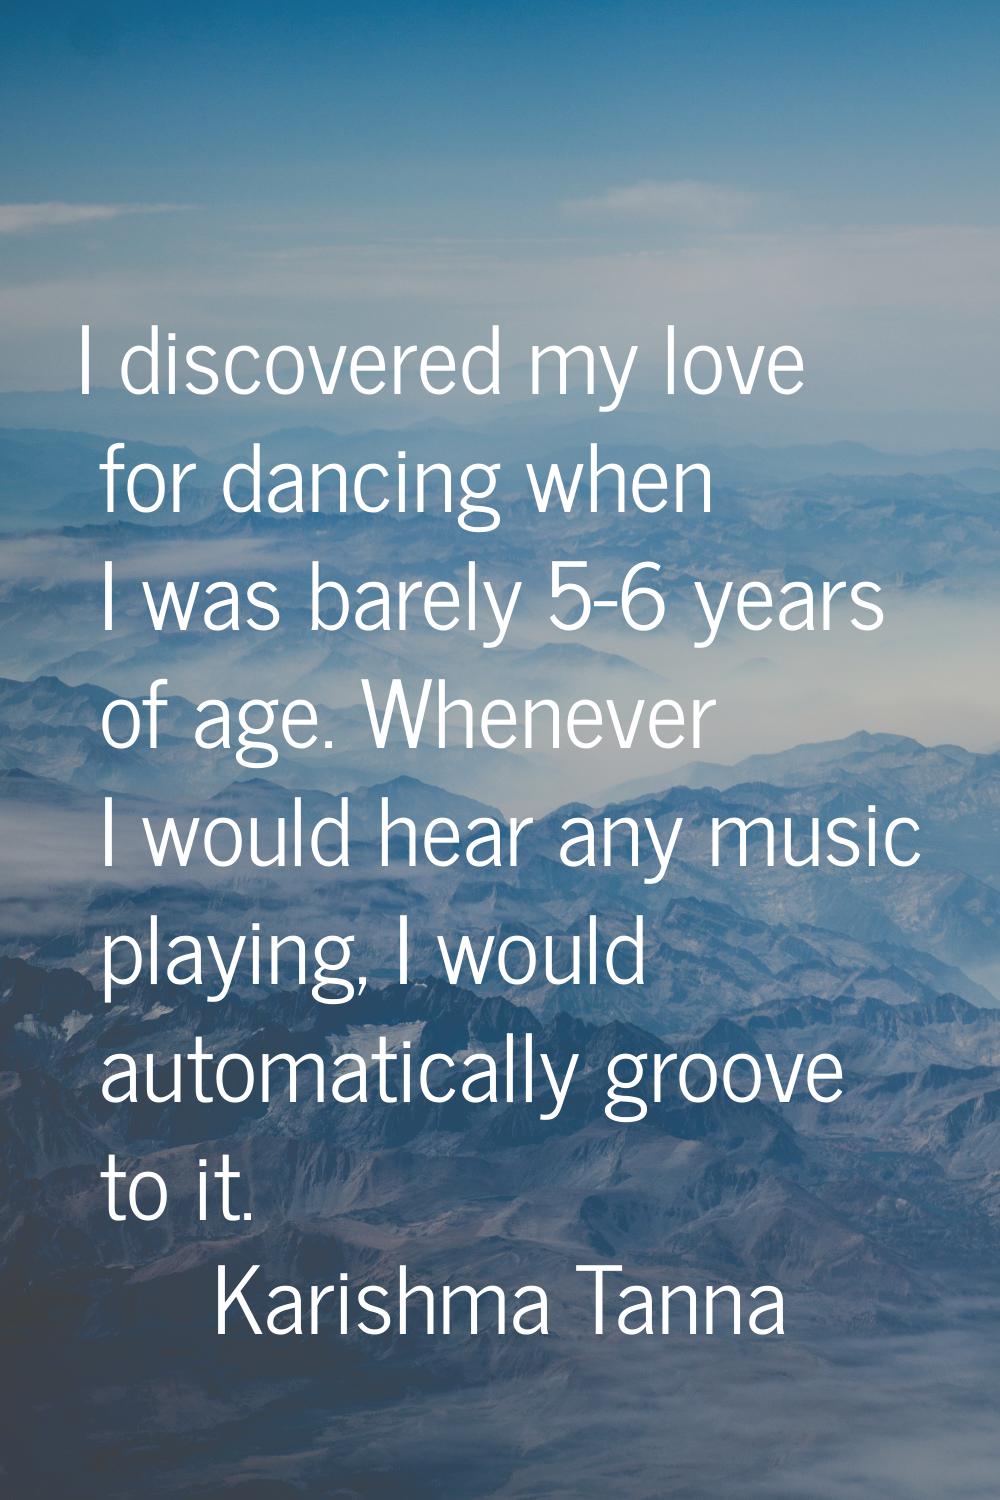 I discovered my love for dancing when I was barely 5-6 years of age. Whenever I would hear any musi